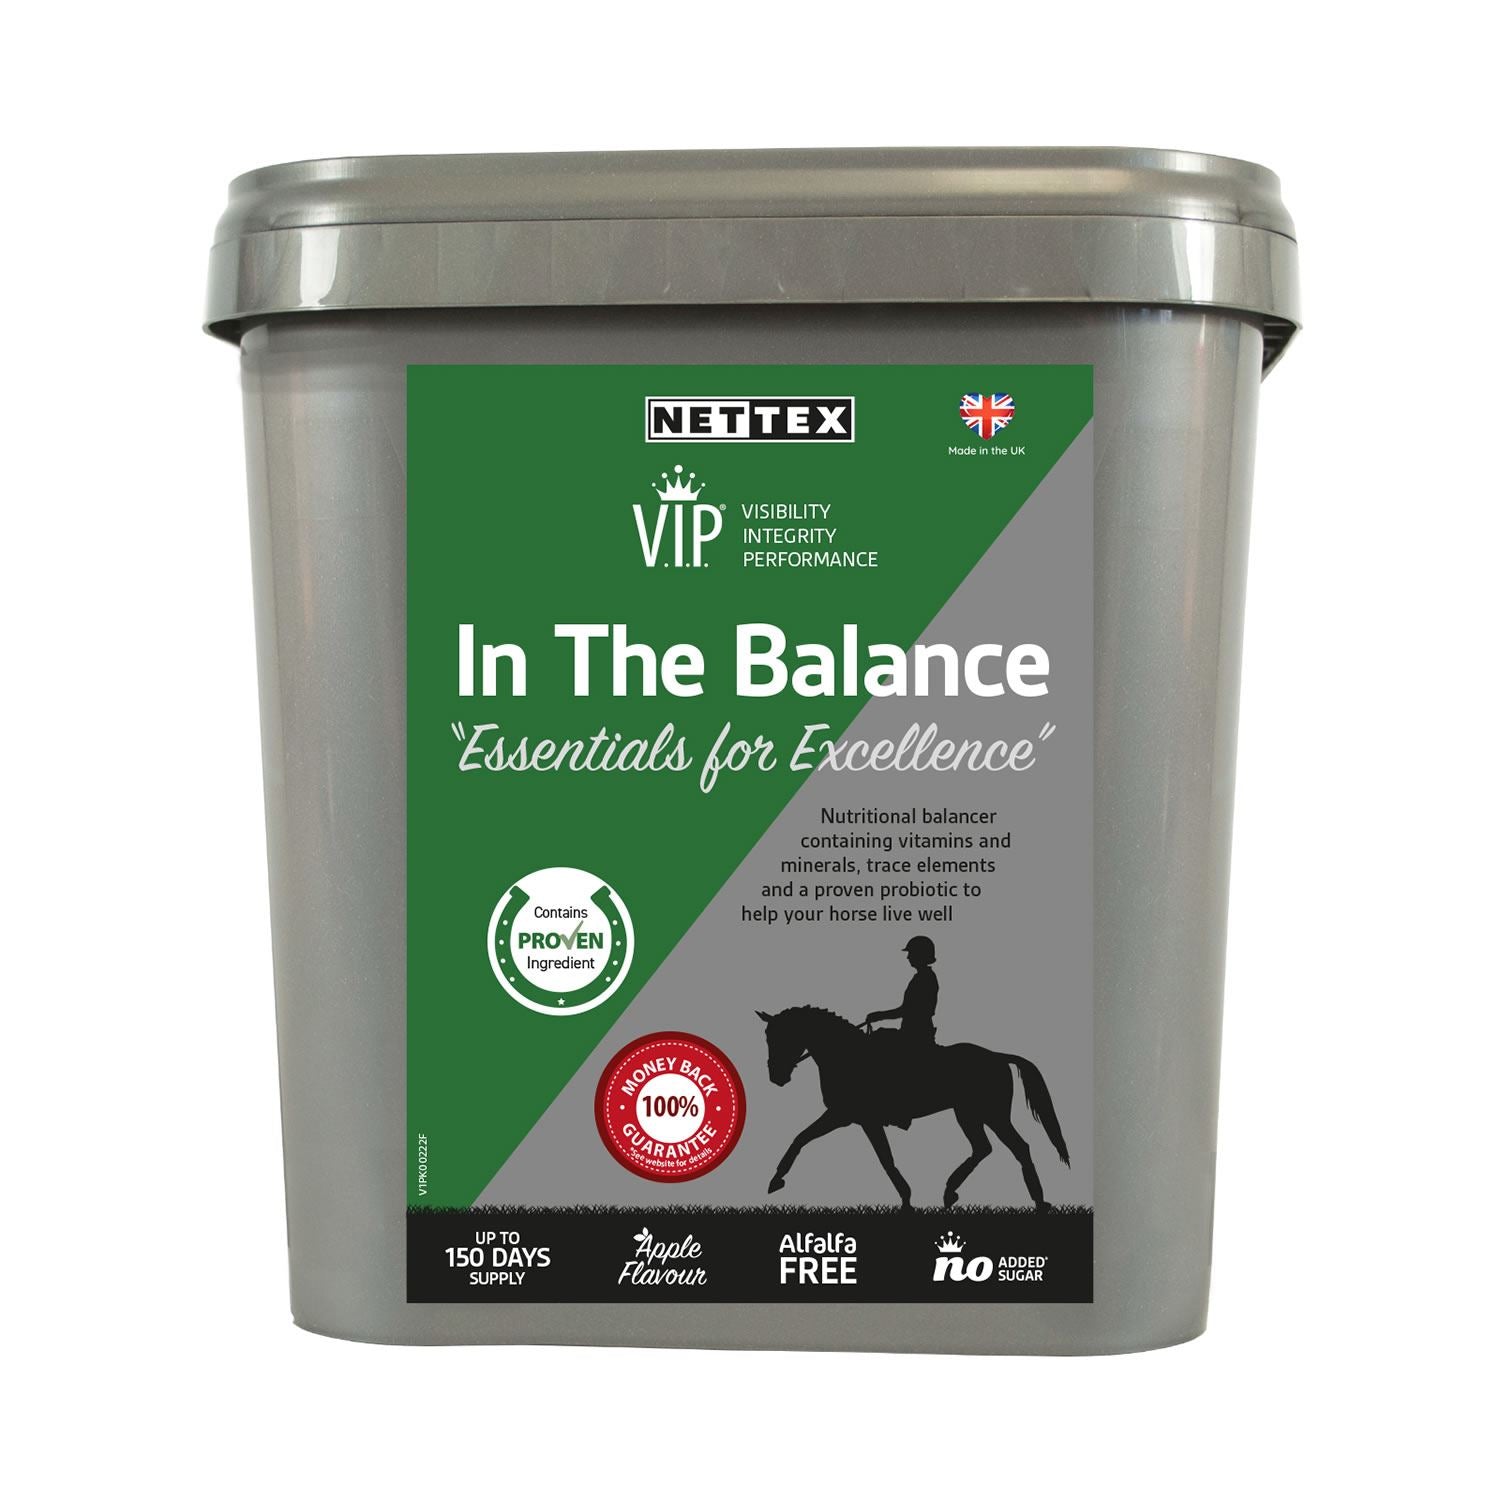 Nettex Vip In The Balance - Just Horse Riders